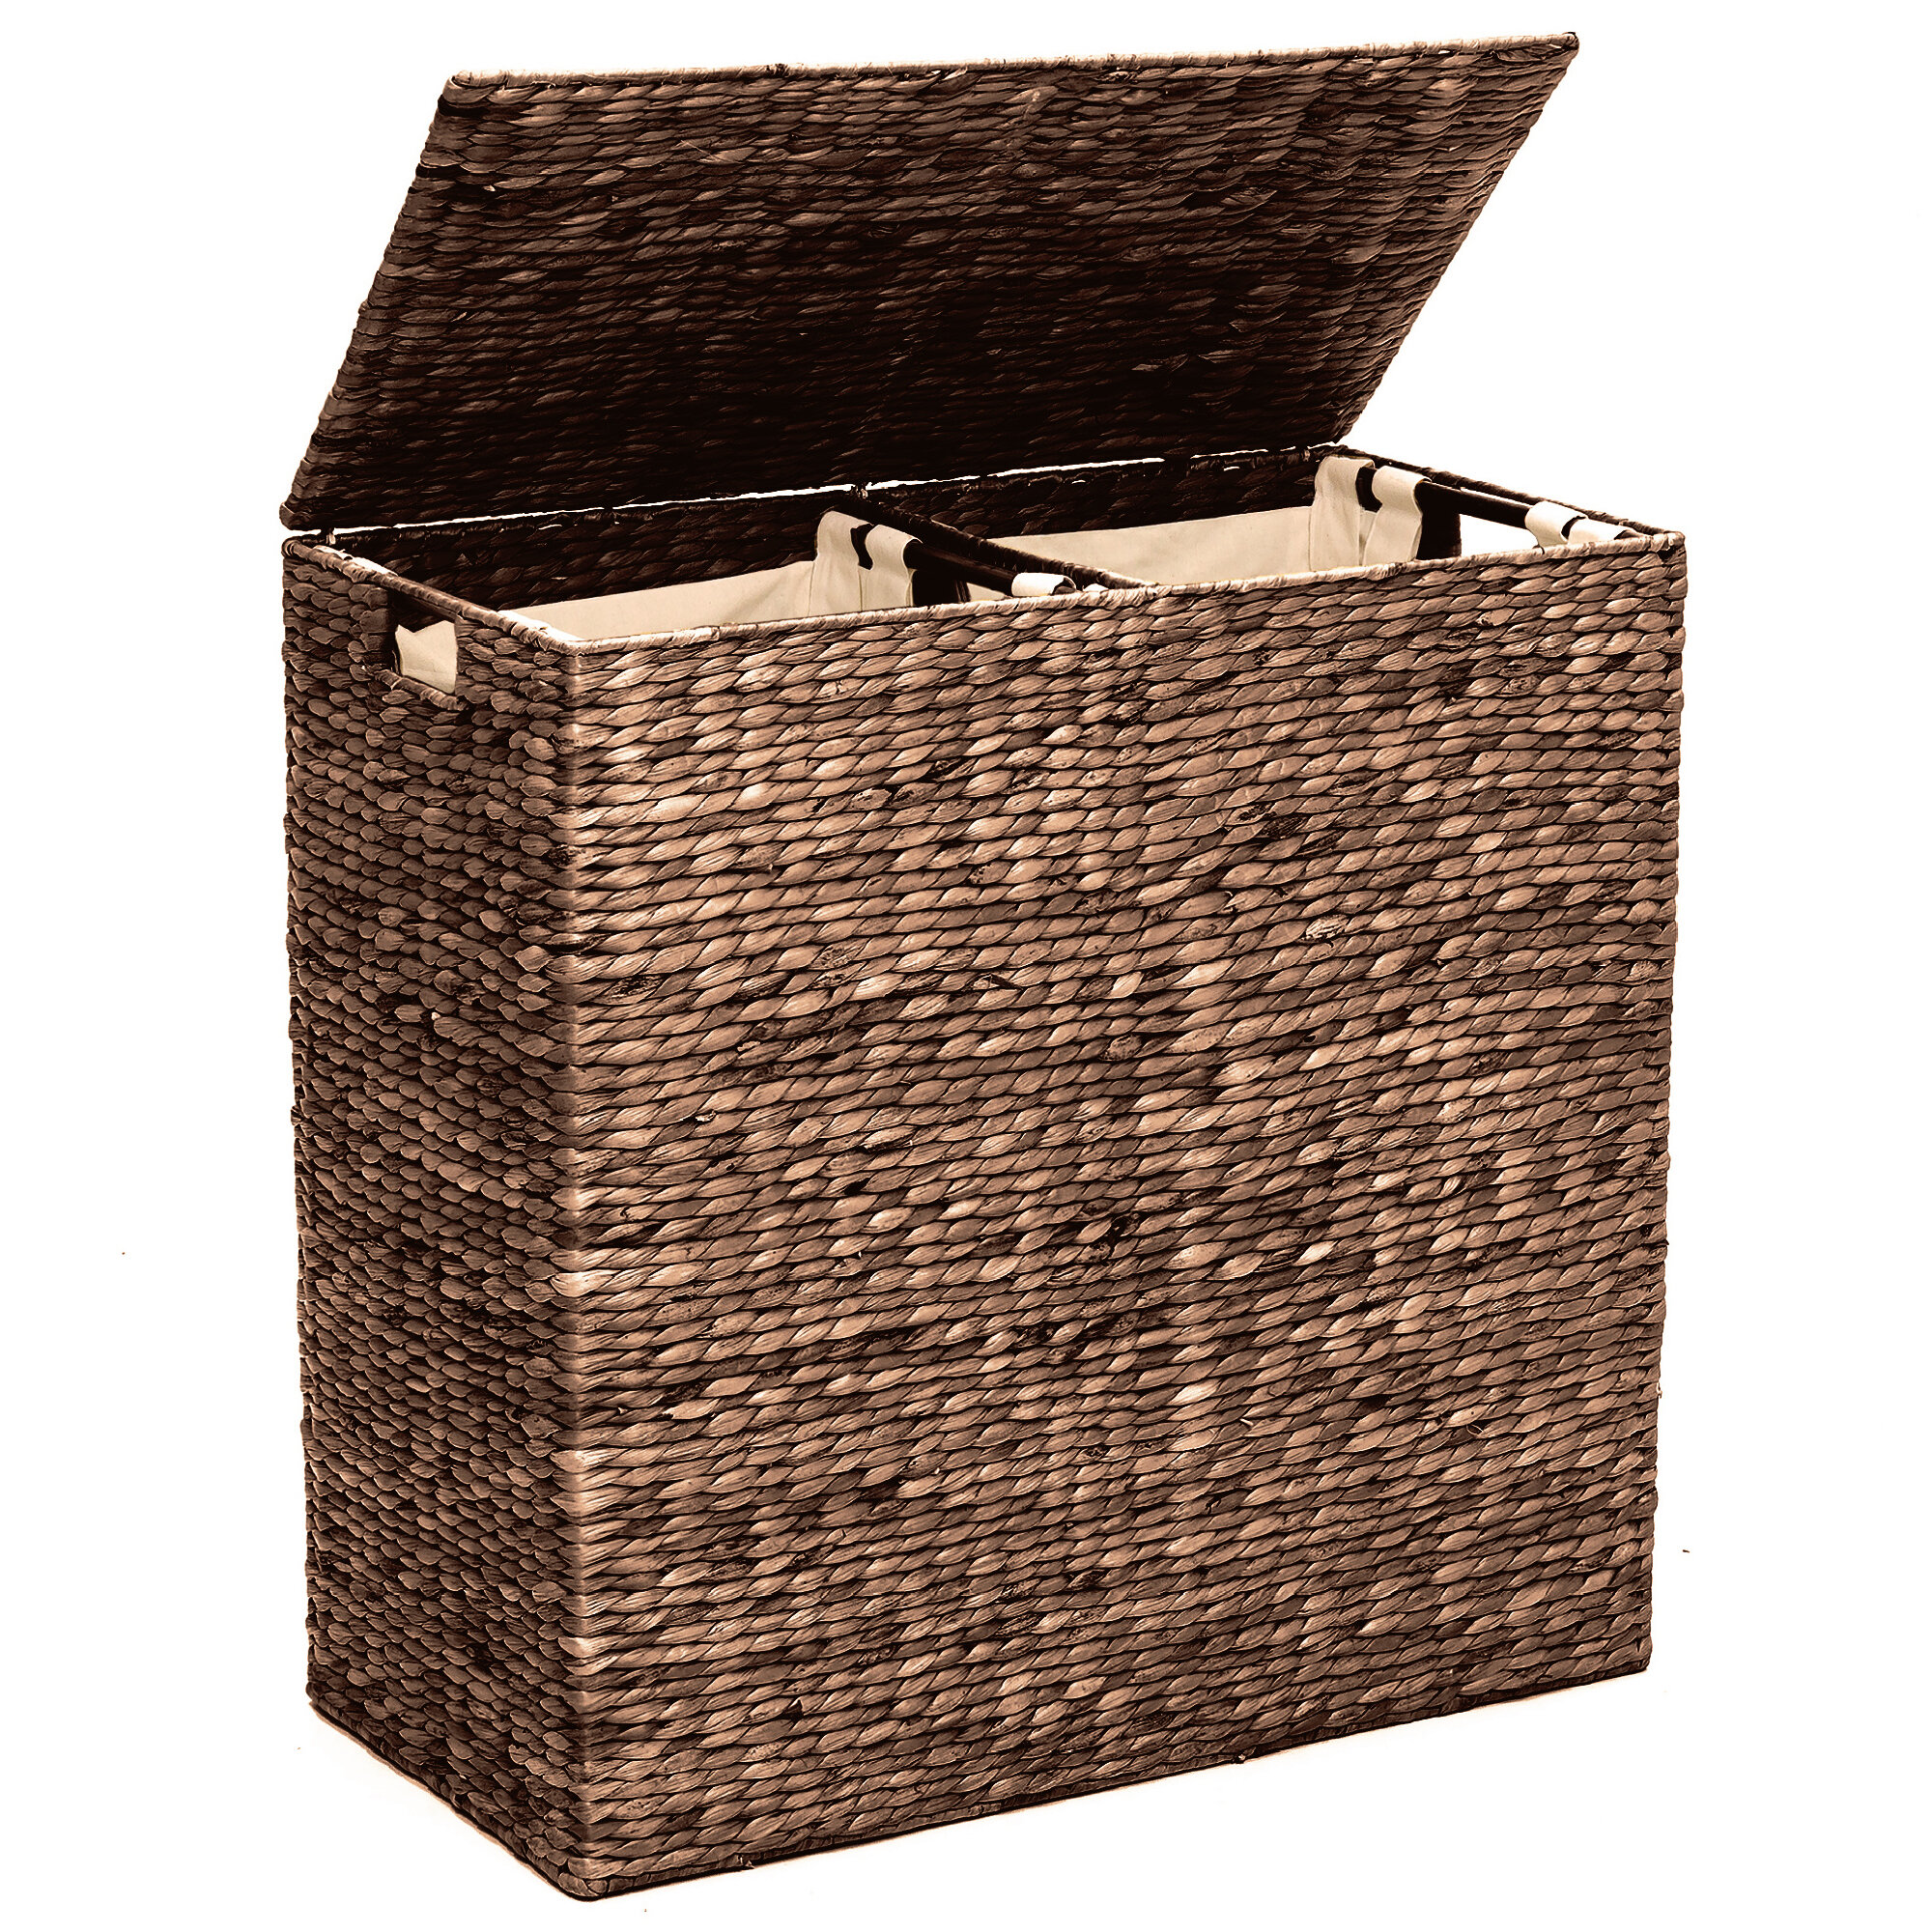 Espresso Bamboo mDesign Bamboo Single Hamper Basket with Removable Liner 